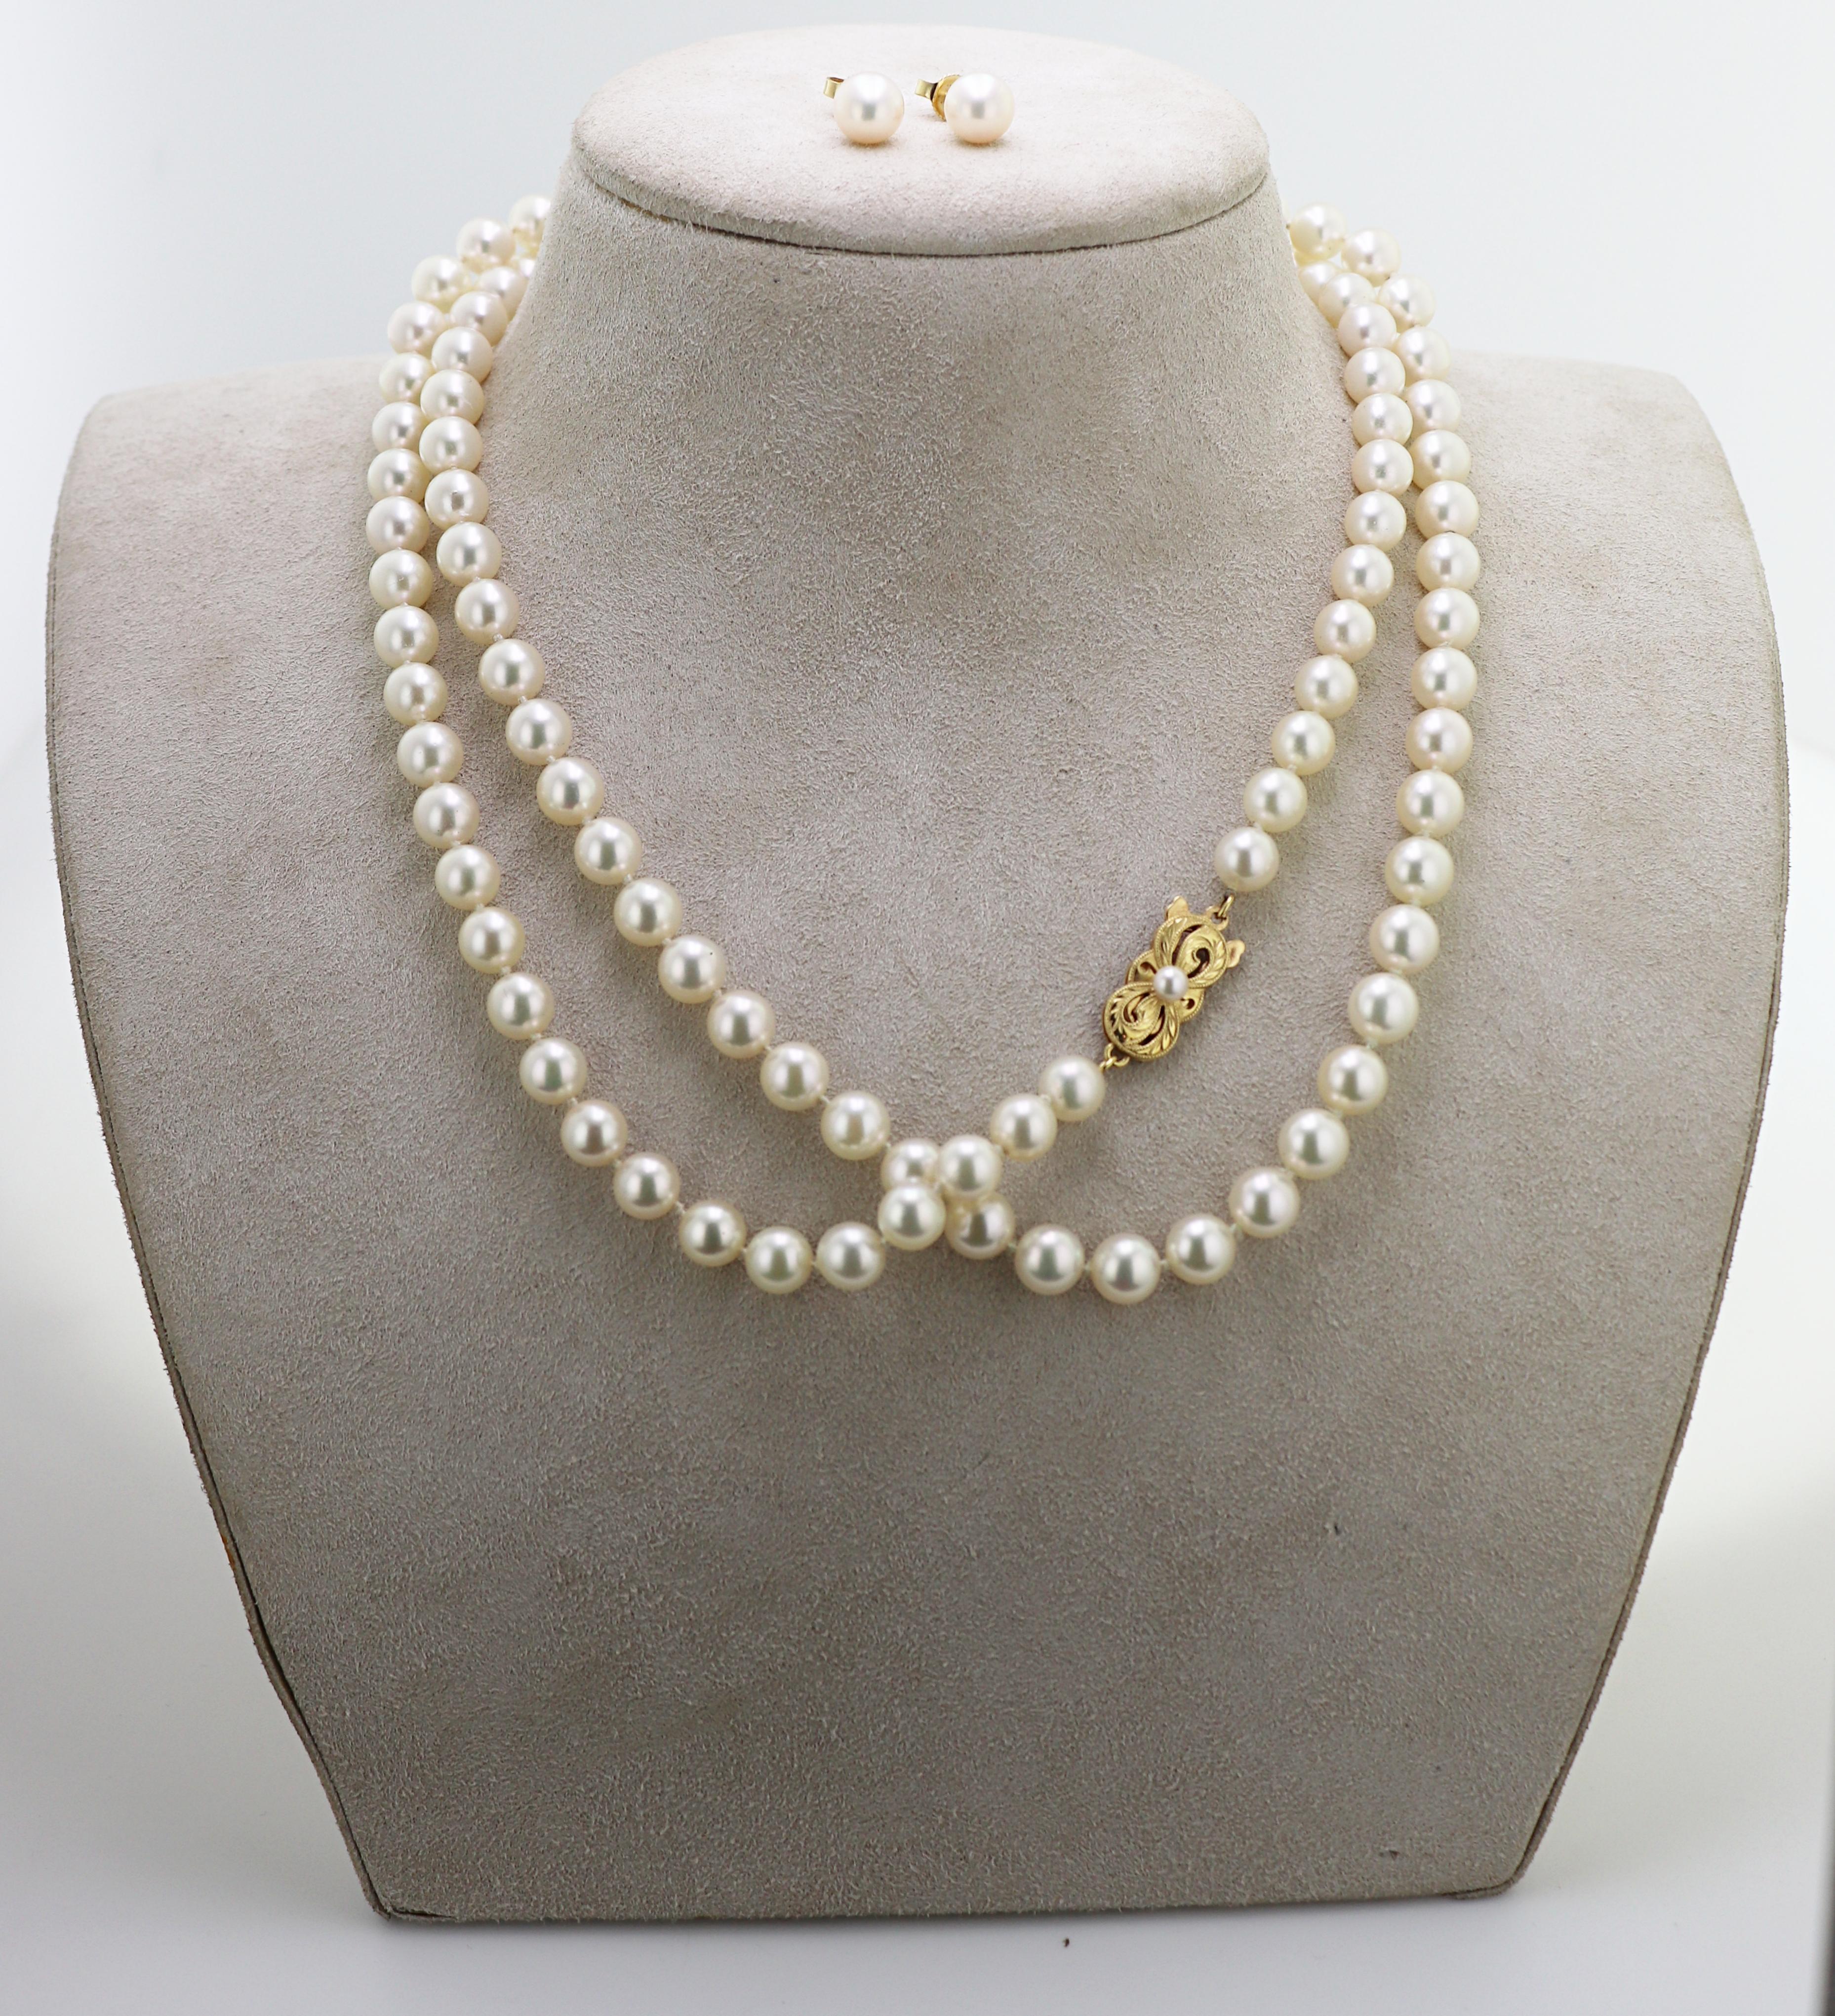 how to tell if pearls are mikimoto